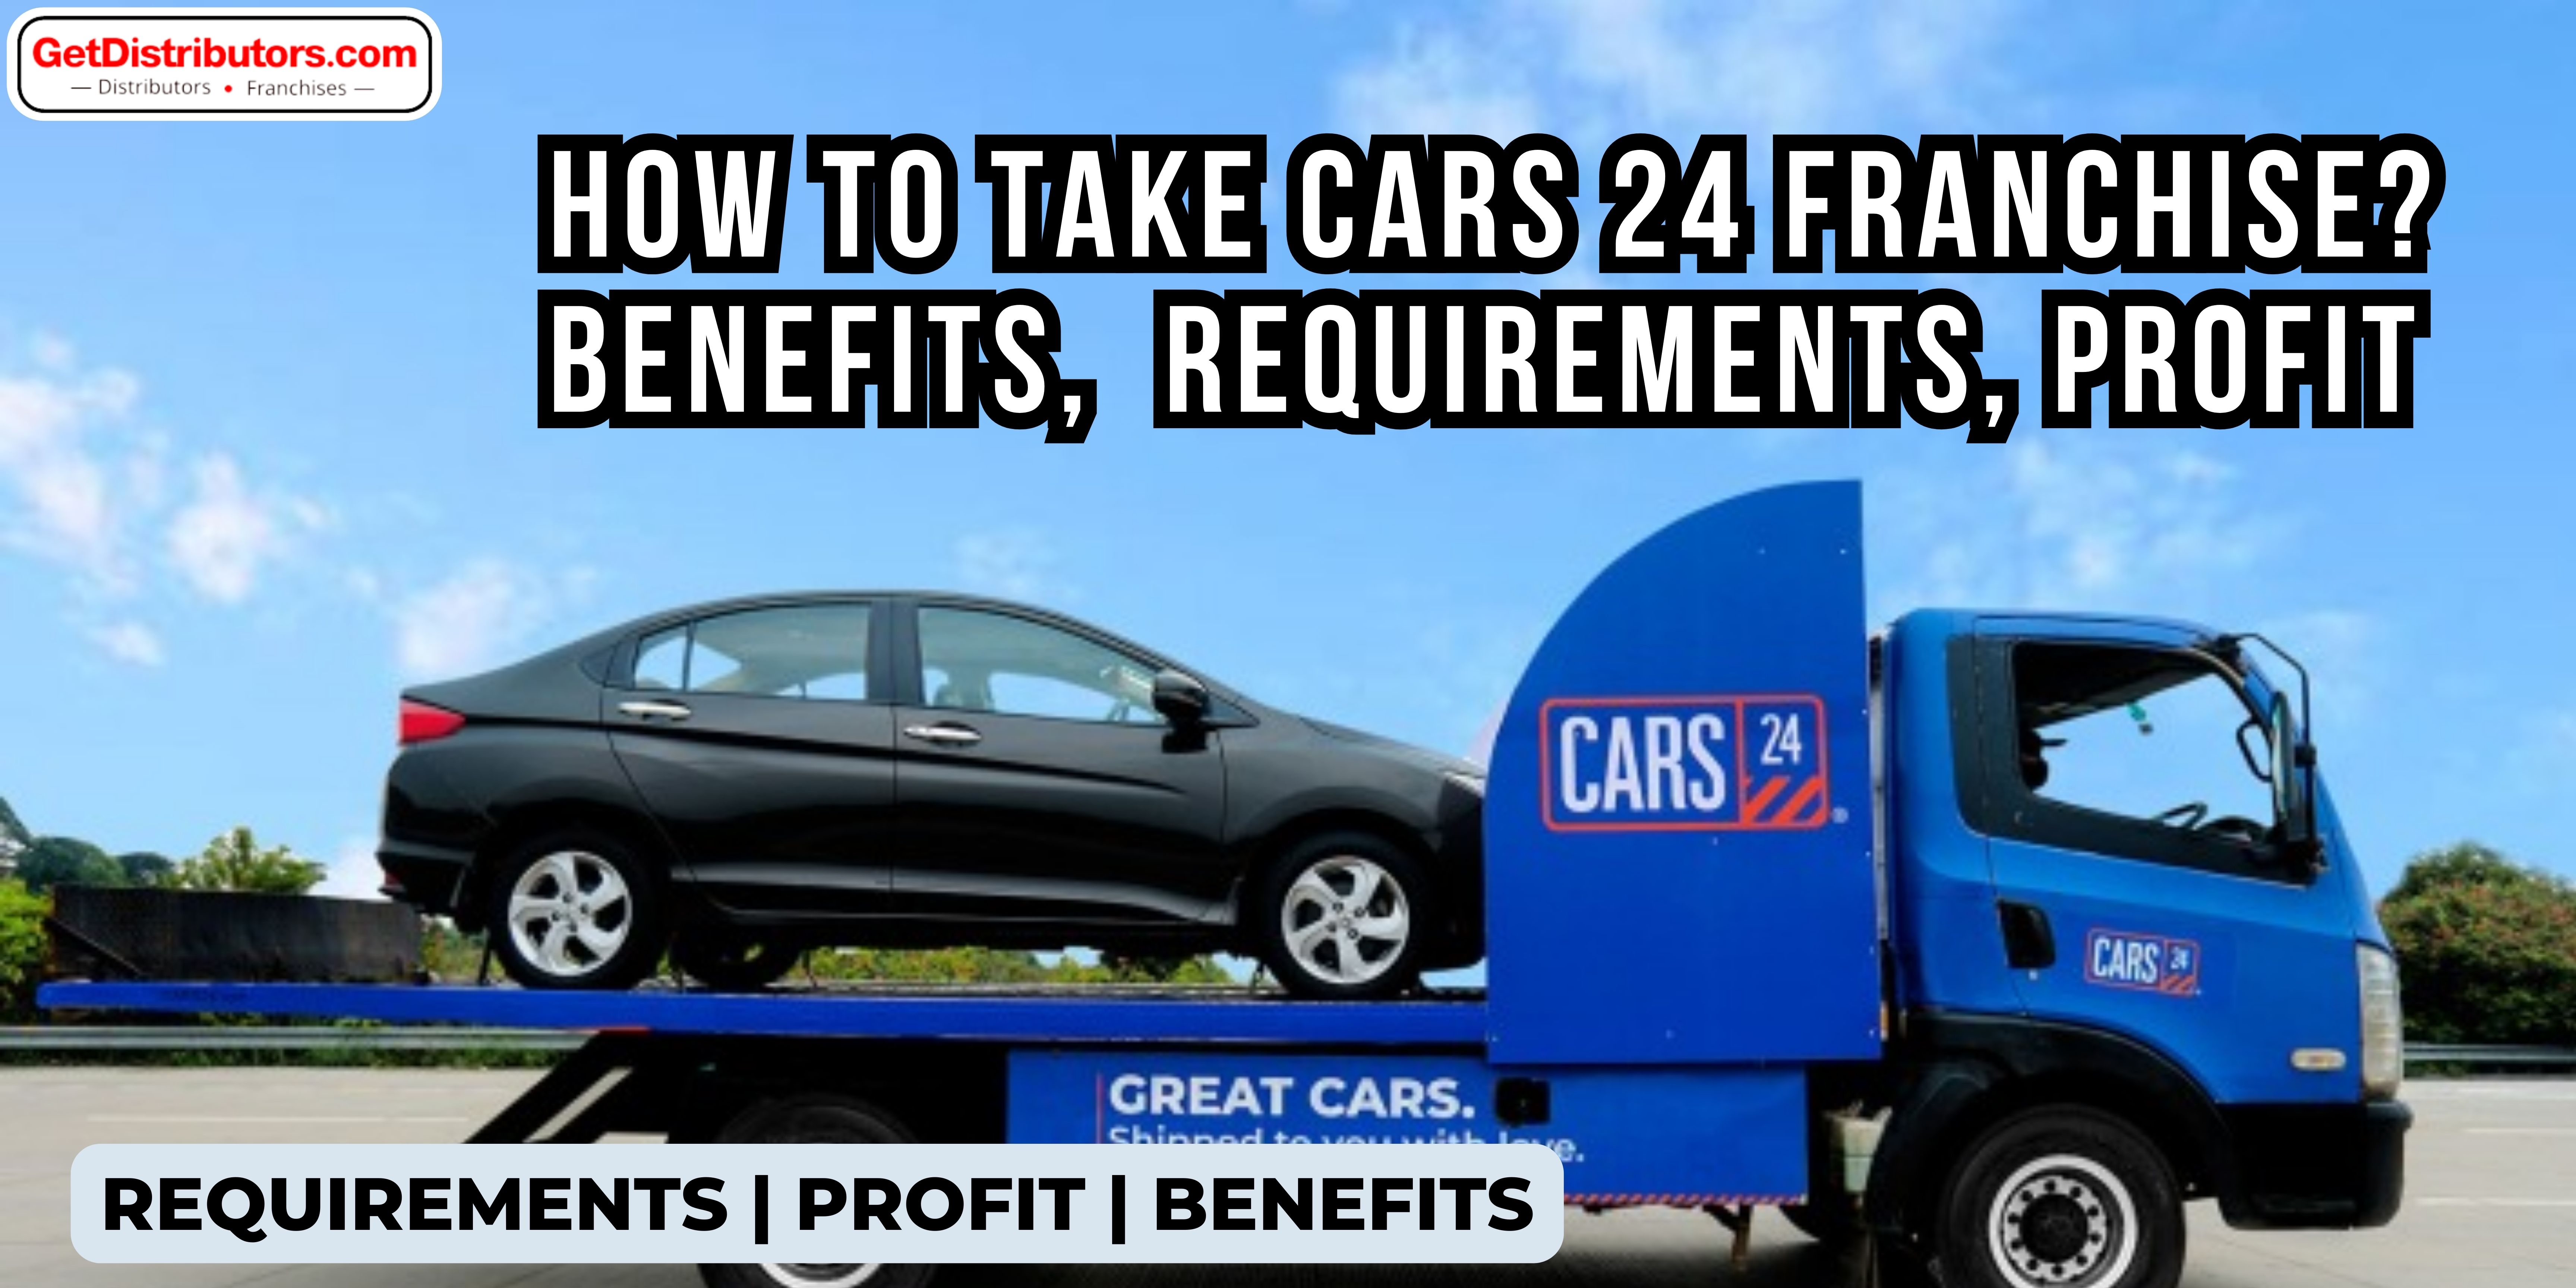 How to Take Cars 24 Franchise? Requirements, Profit, Benefits